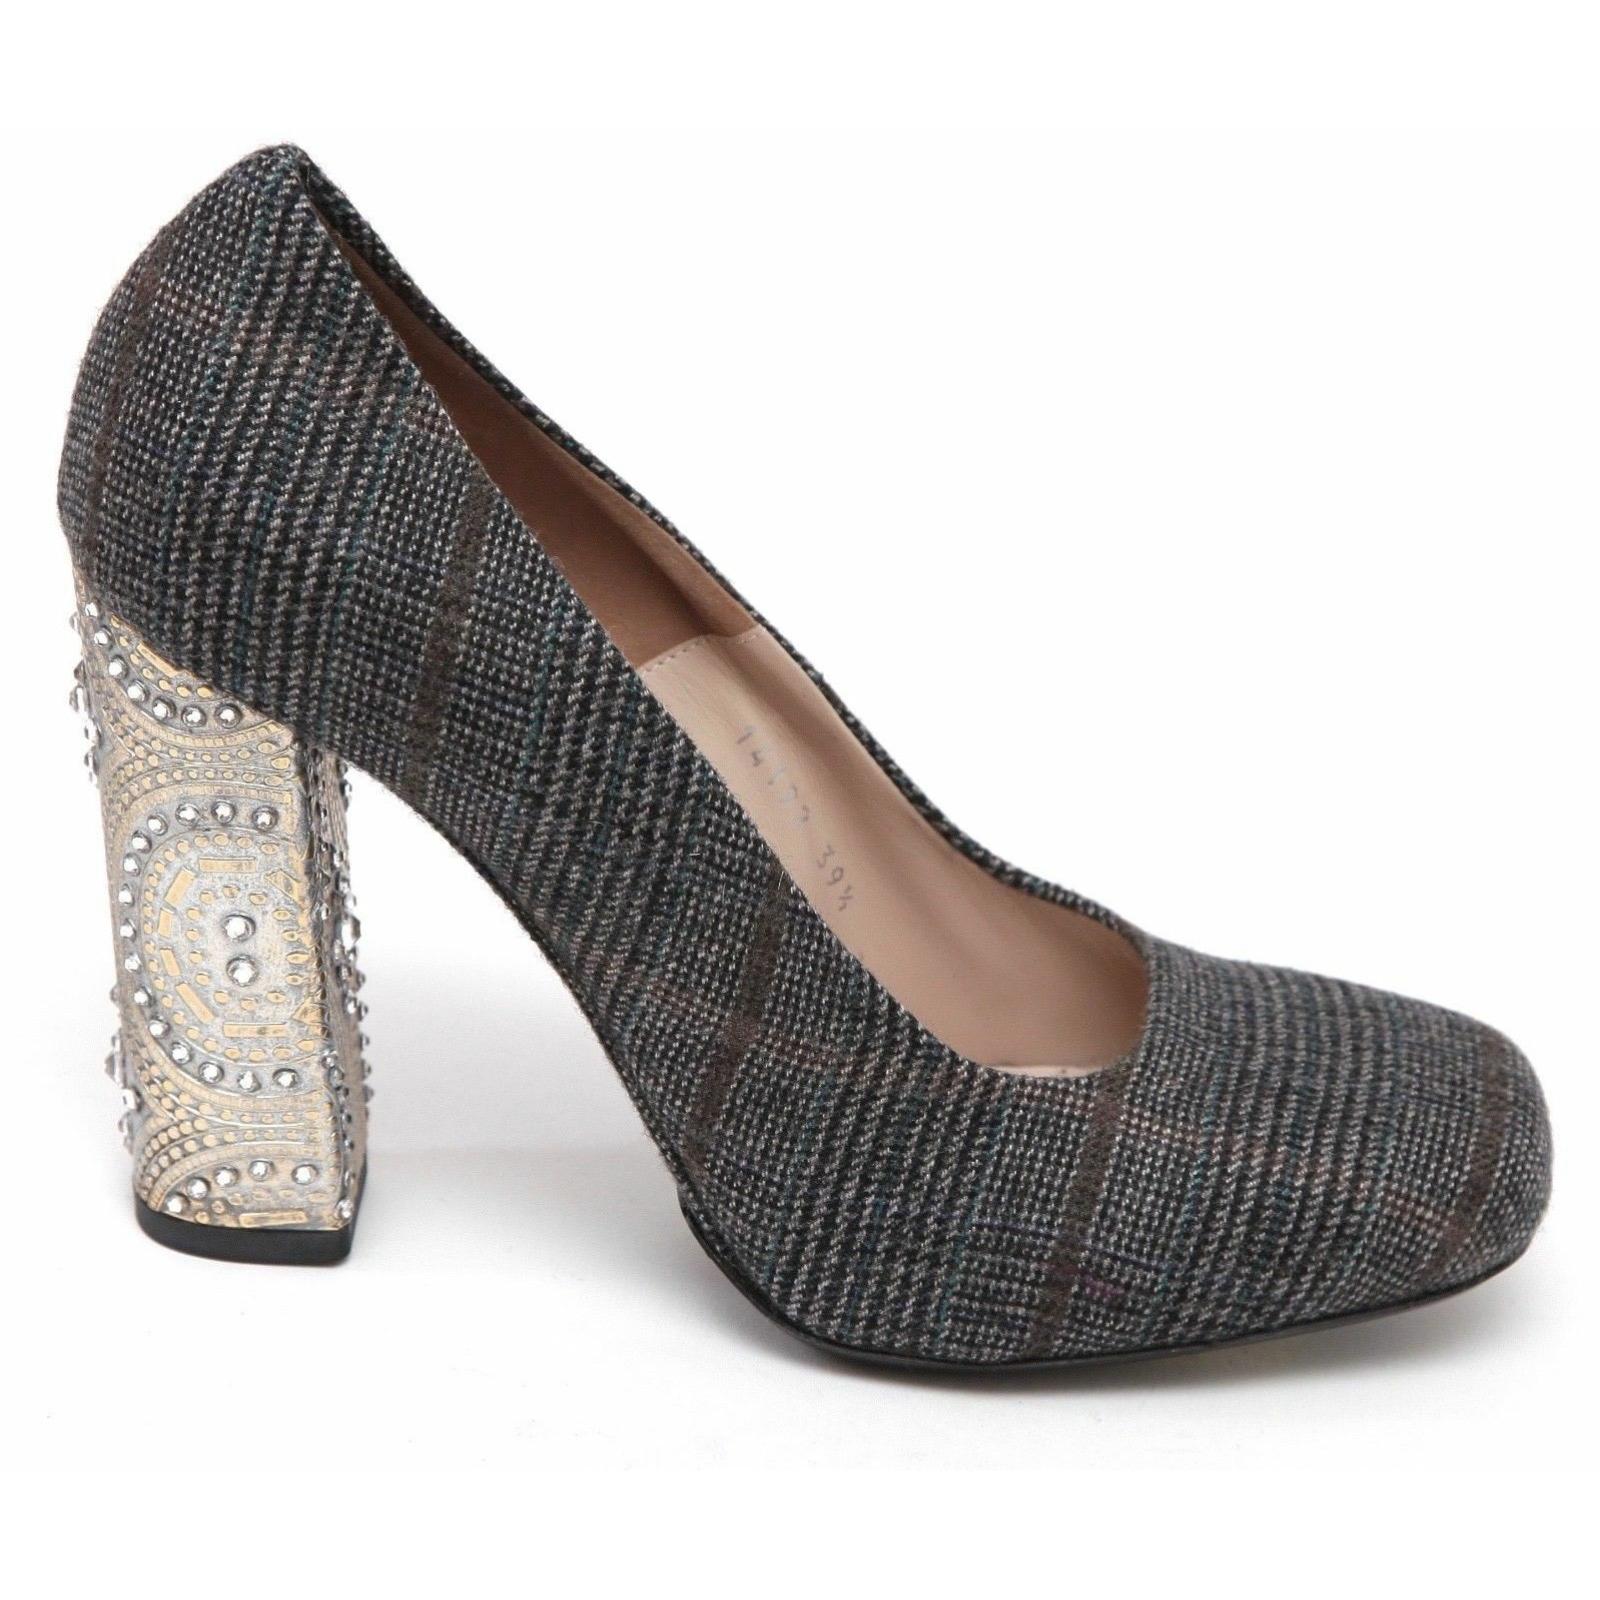 GUARANTEED AUTHENTIC DRIES VAN NOTEN WOOL PLAID PUMP WITH CRYSTAL HEEL EMBELLISHMENT

Retail excluding tax $985

Design:
- Plaid check pattern wool uppers in grey, brown and blue colors.
- Square toe.
- Crystal embellished block heel.
- Leather